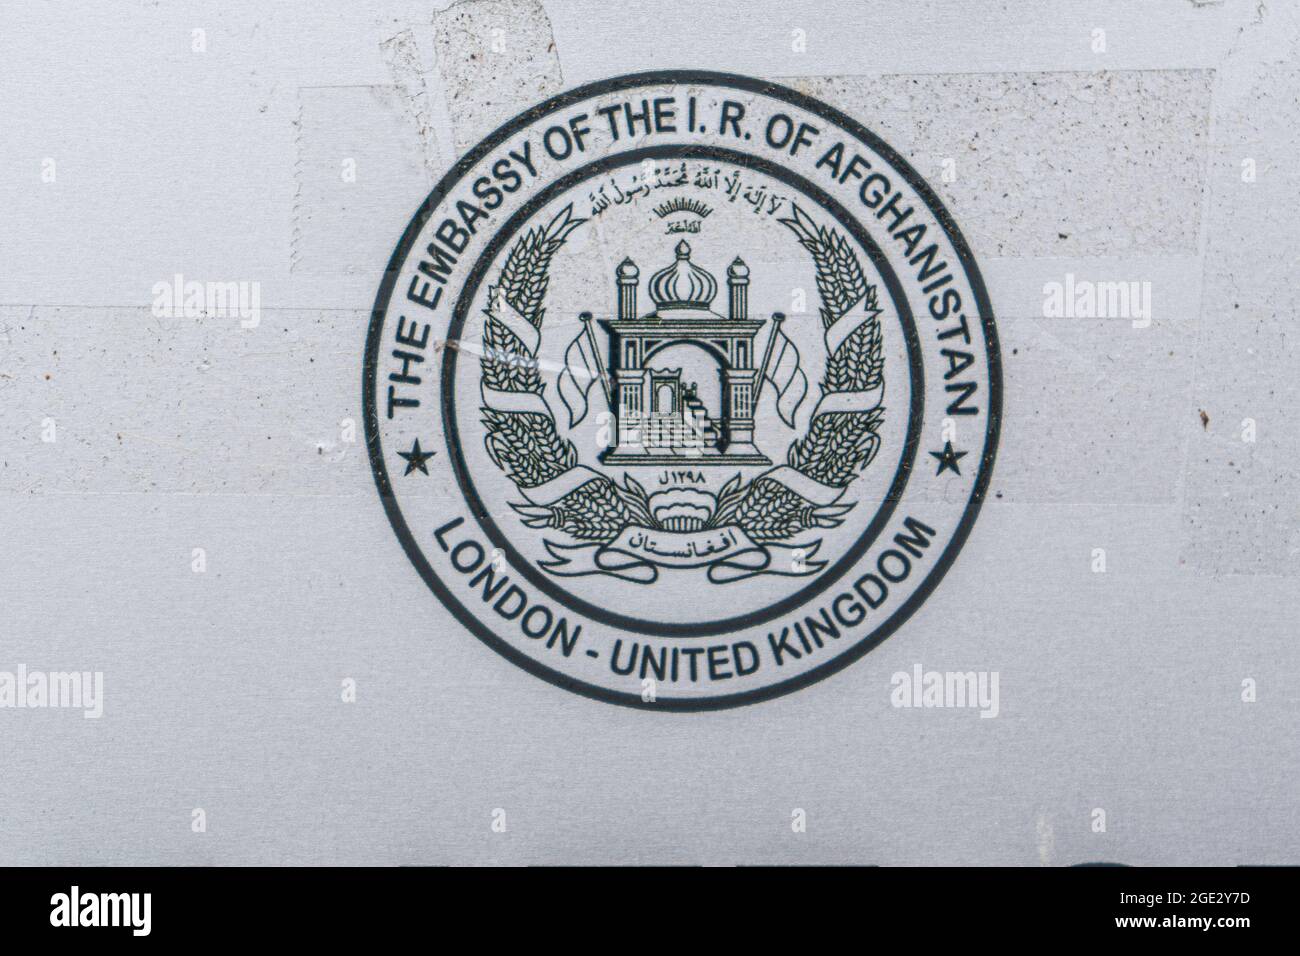 KNIGHTSBRIDGE LONDON 16 August 2021. A plaque with the logo of the Afghanistan foreign mission in London which is expected to close within days  as it's  diplomats face an uncertain future after the Taliban seizer power   Credit amer ghazzal/Alamy Live News Stock Photo